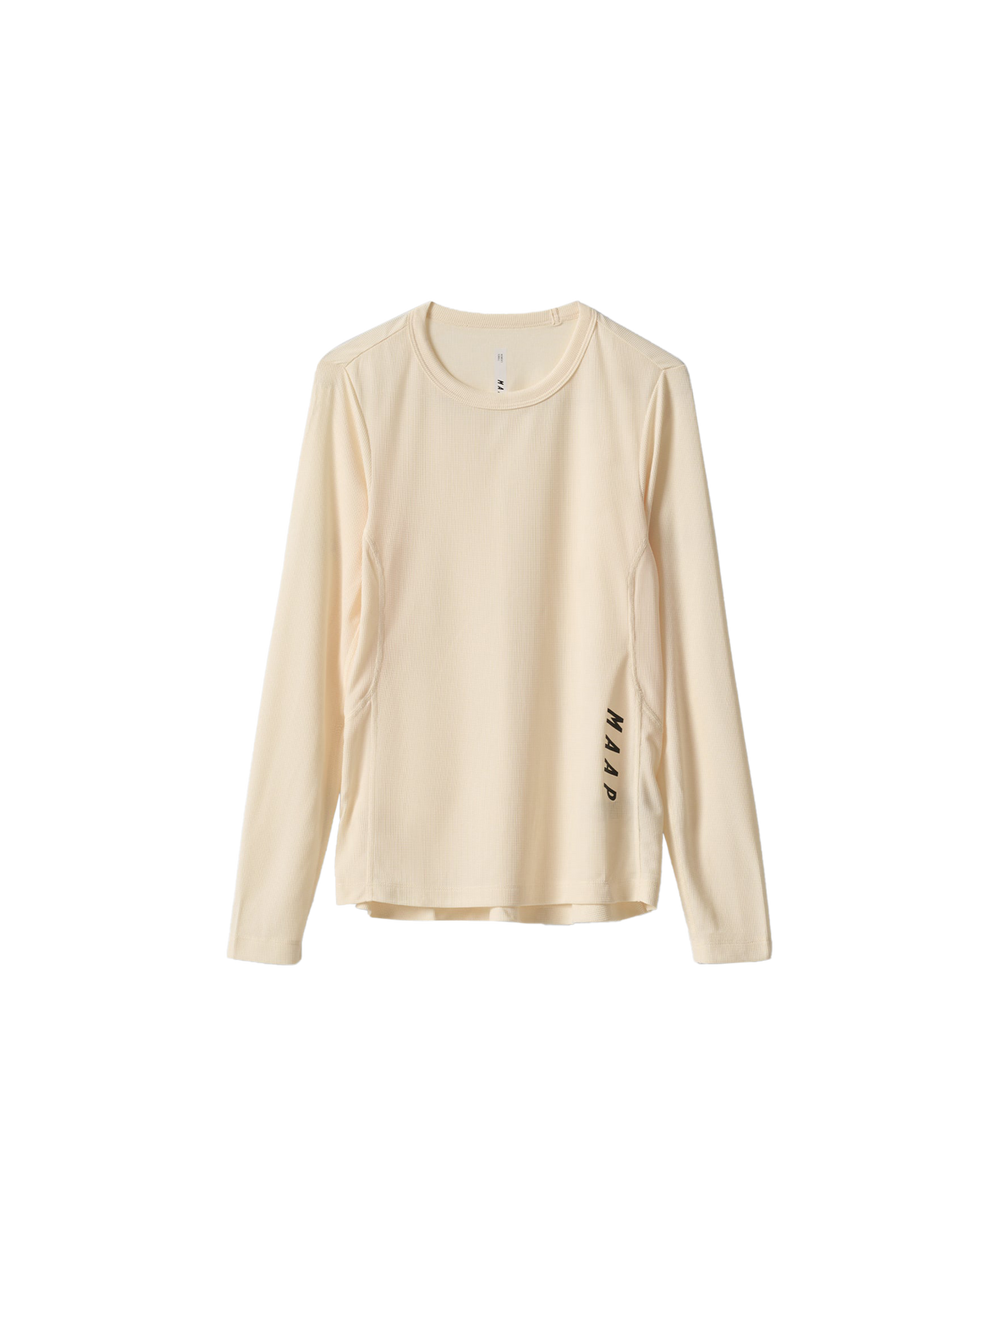 Product Image for Women's Alt_Road Ride LS Tee 3.0